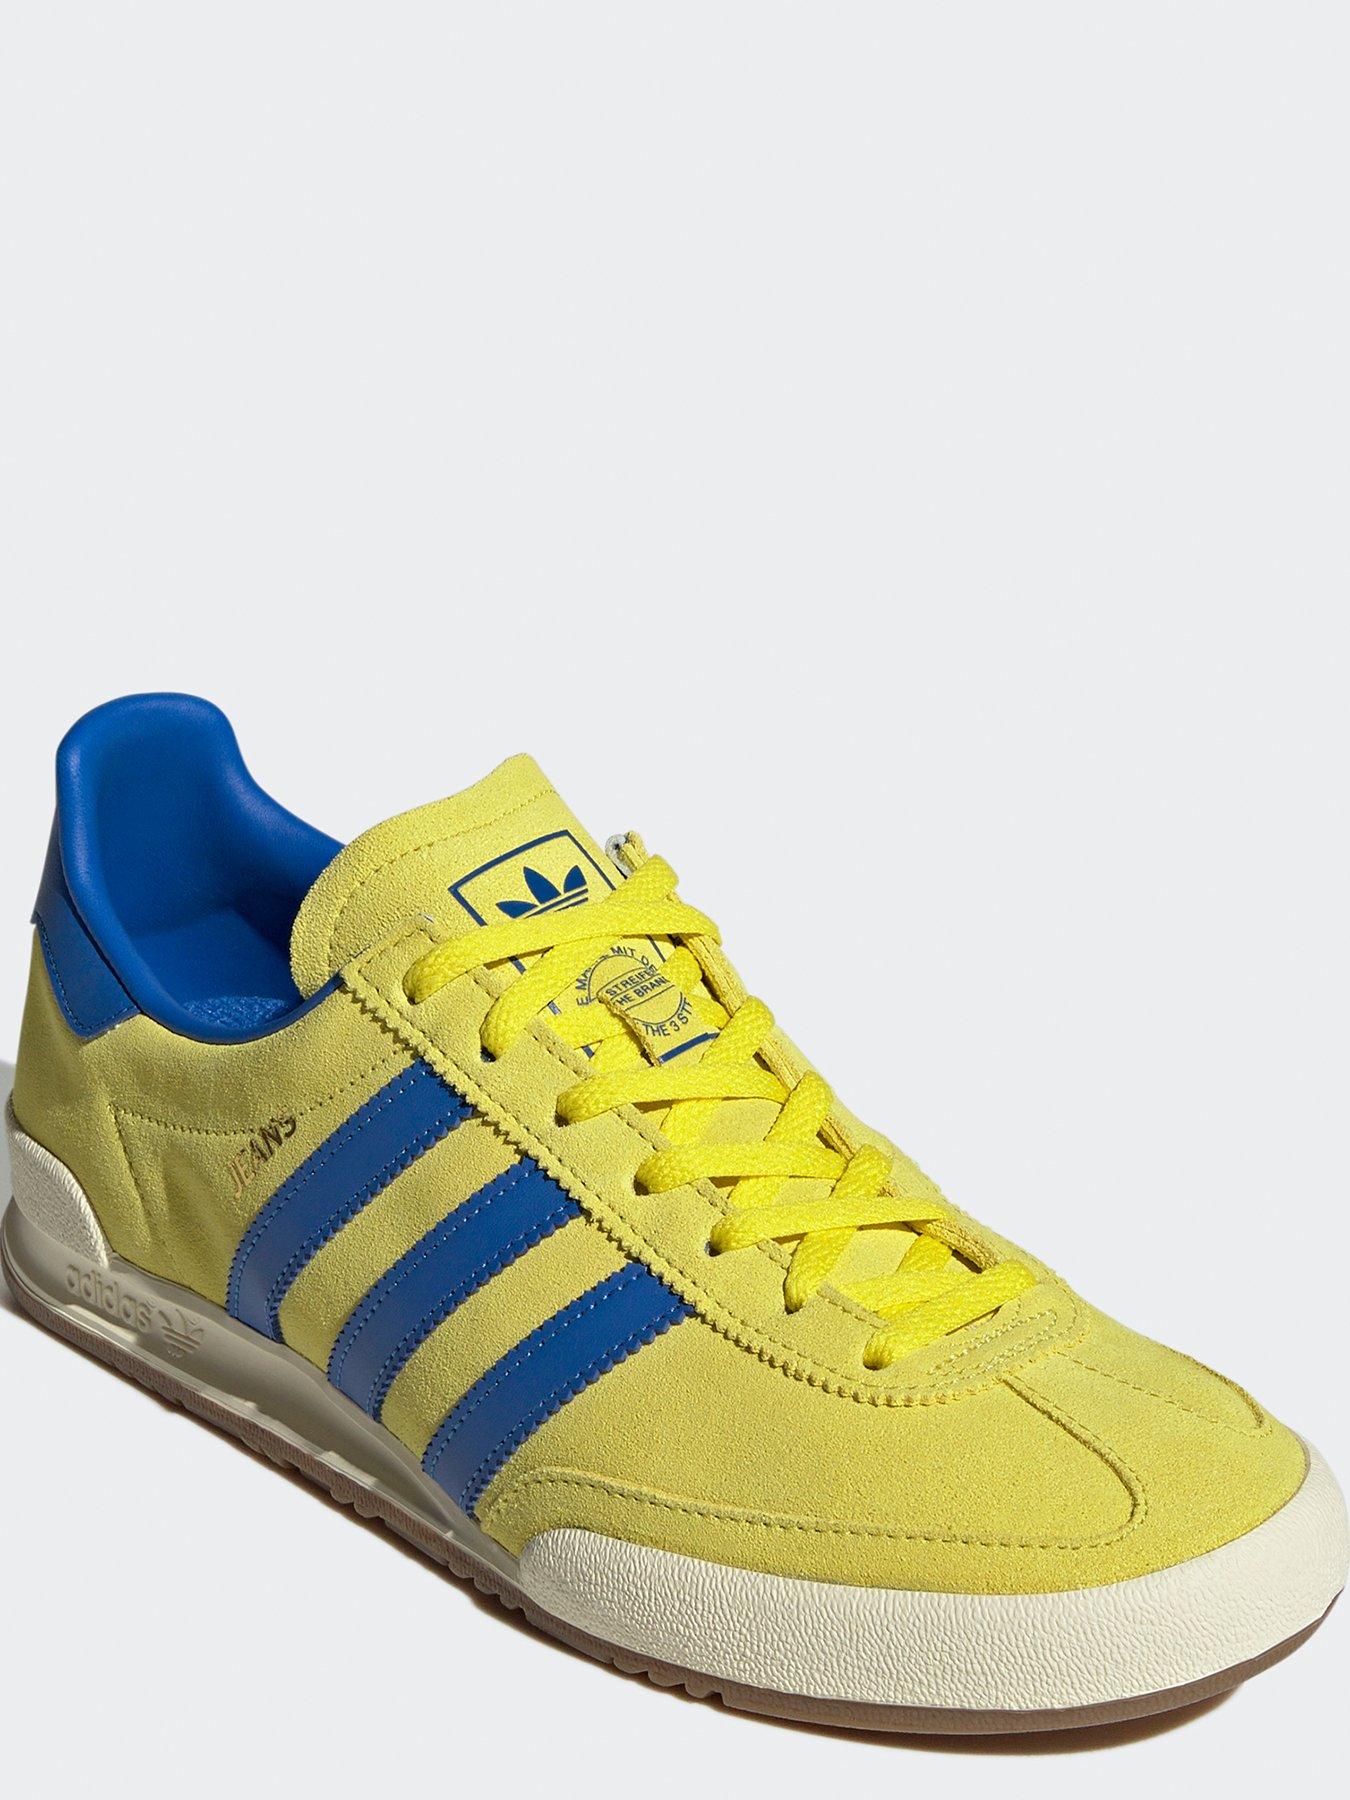 Maryanne Jones whisky Calígrafo adidas Originals Jeans Trainers - Yellow/Blue | very.co.uk